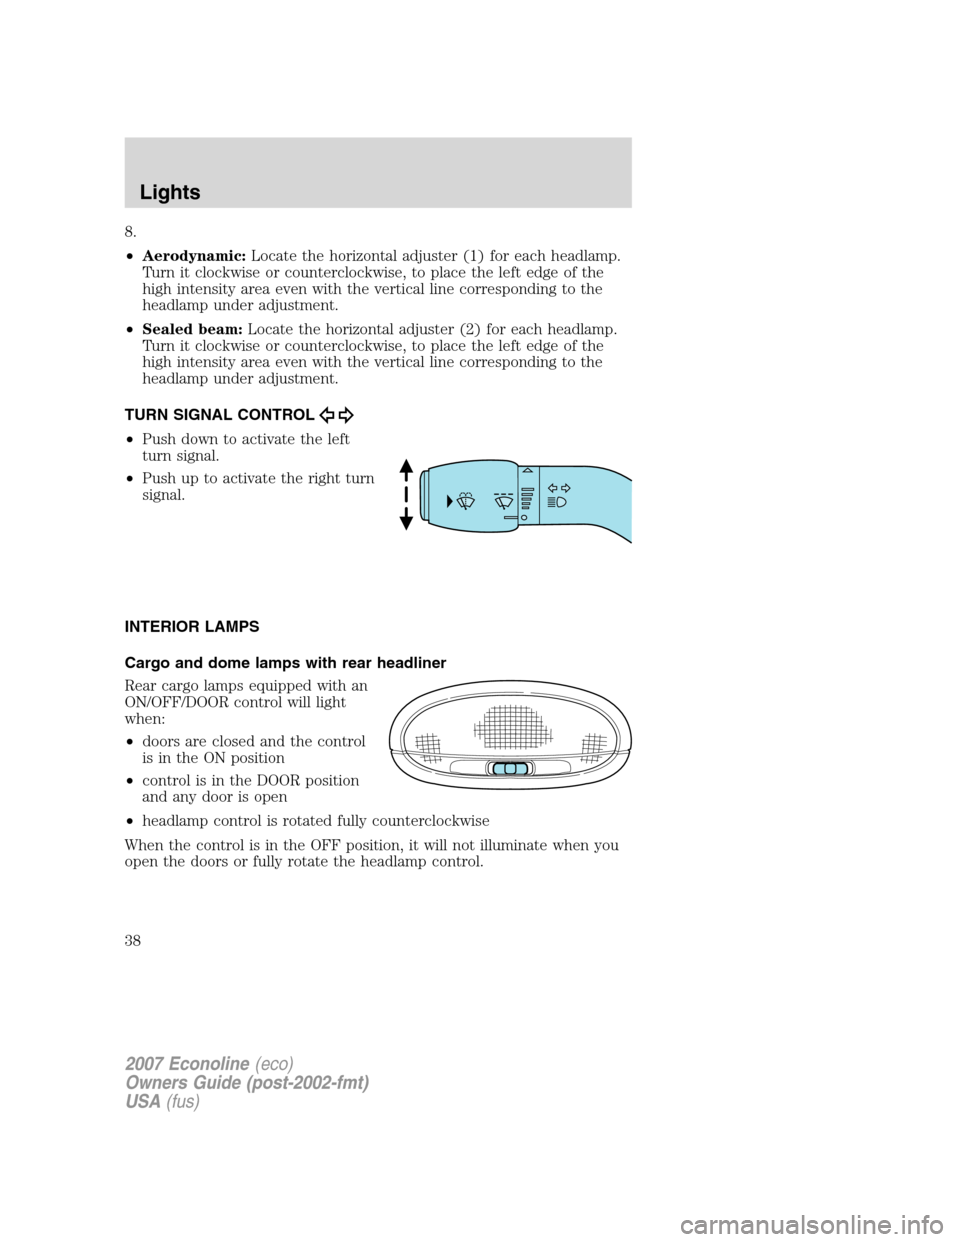 FORD E SERIES 2007 4.G Owners Guide 8.
•Aerodynamic:Locate the horizontal adjuster (1) for each headlamp.
Turn it clockwise or counterclockwise, to place the left edge of the
high intensity area even with the vertical line correspondi